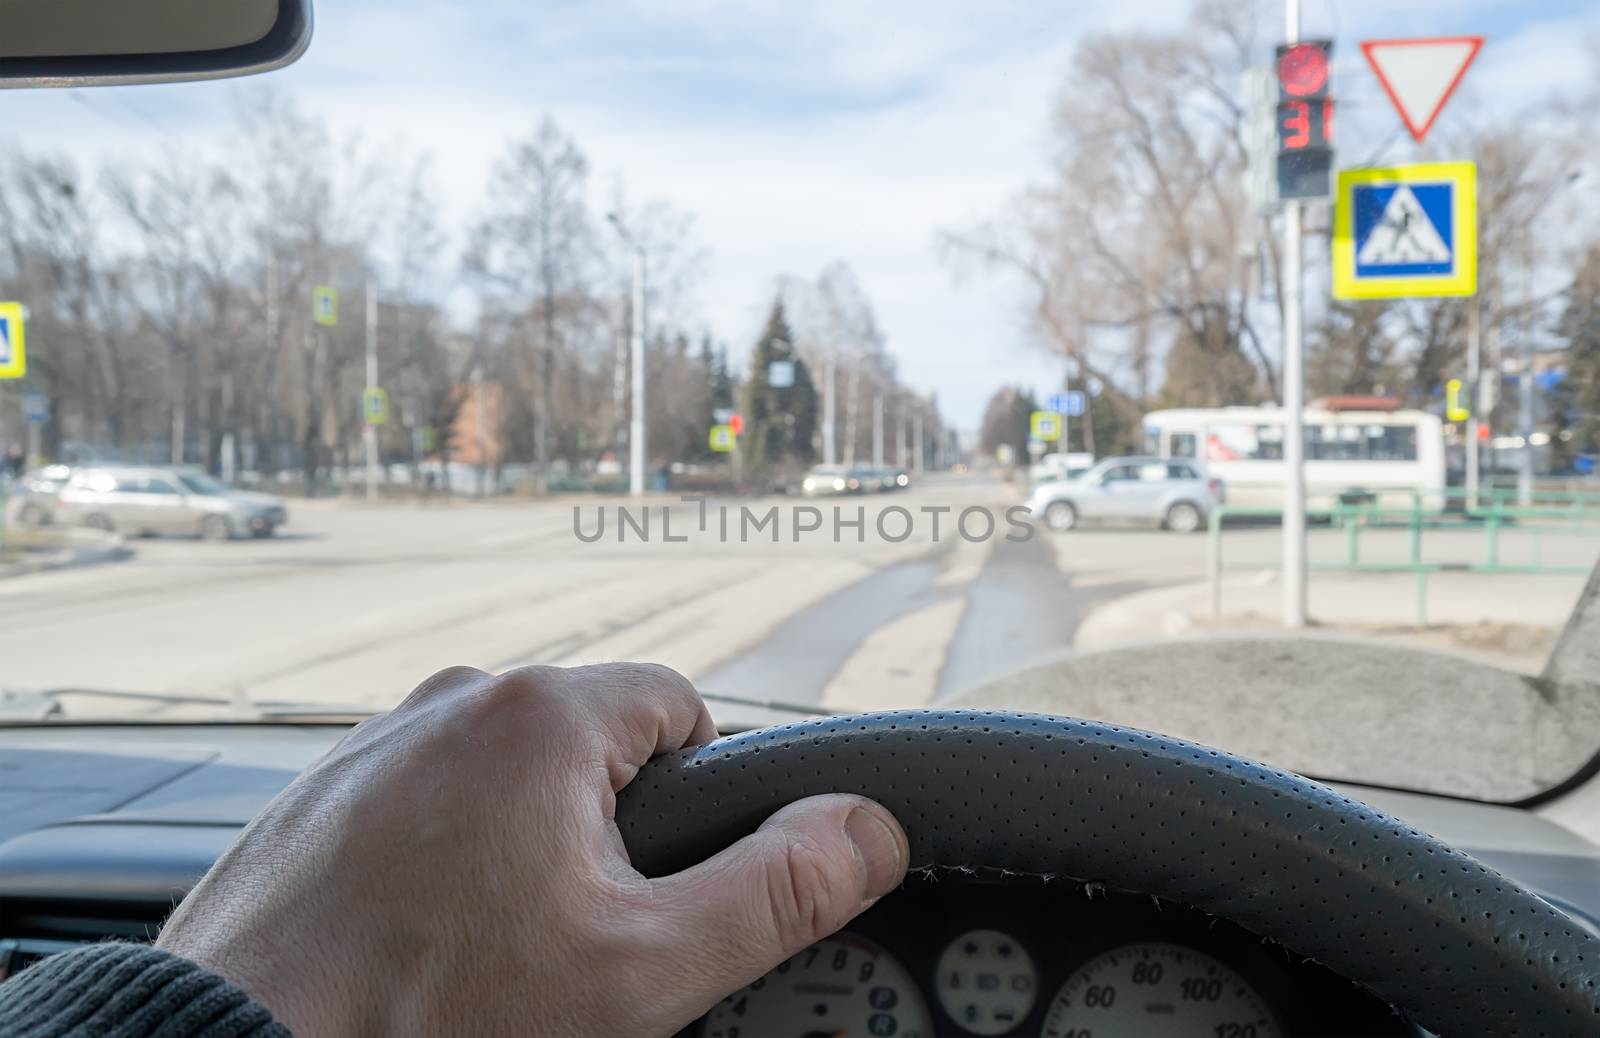 the driver hand on the steering wheel of a car located in front of a red prohibiting traffic light, pedestrian crosswalk, and cars that the driver gives way to